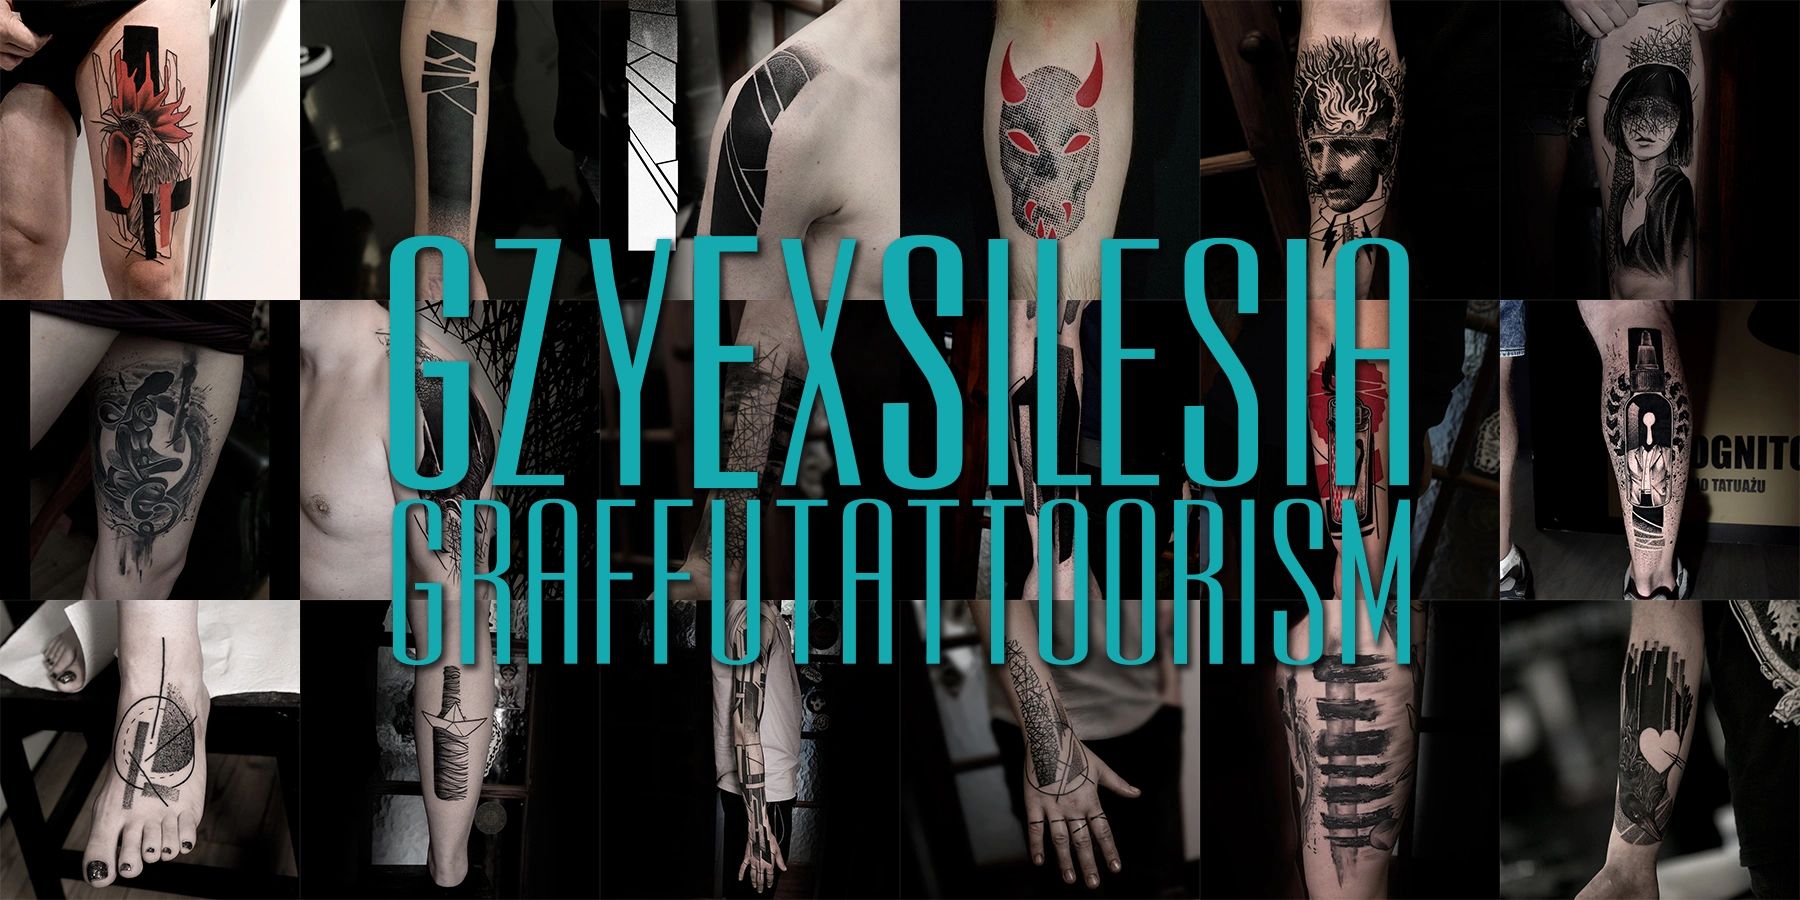 all different art like futurism, abstract and graphic design Tattoos on cool people not only from ed